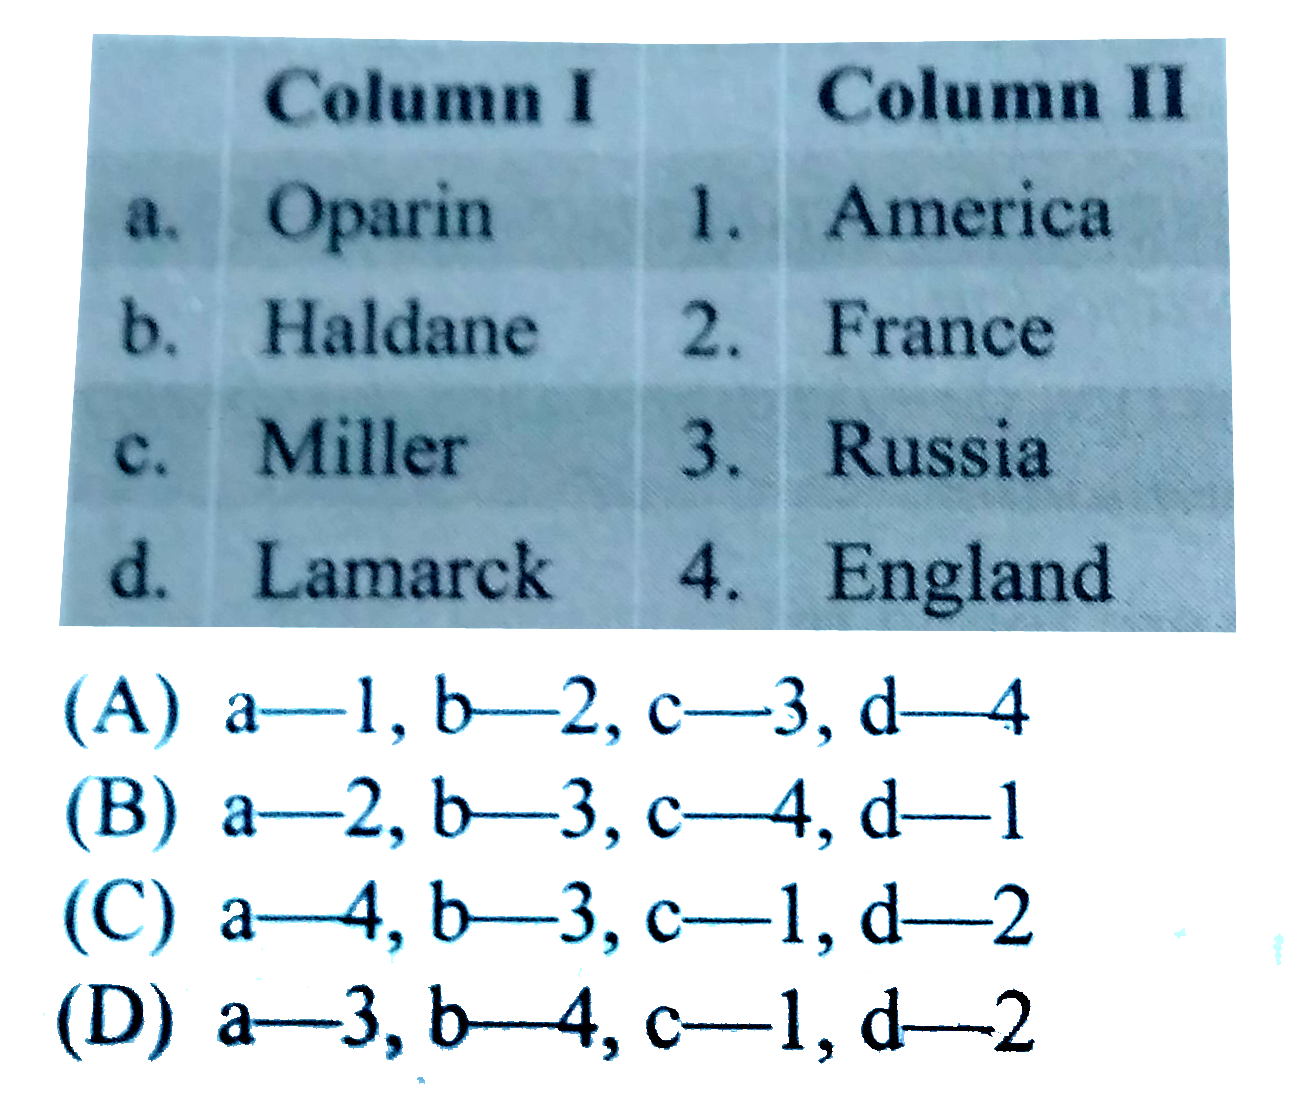 Match the columns I and II, and choose the correct combination from the option given.